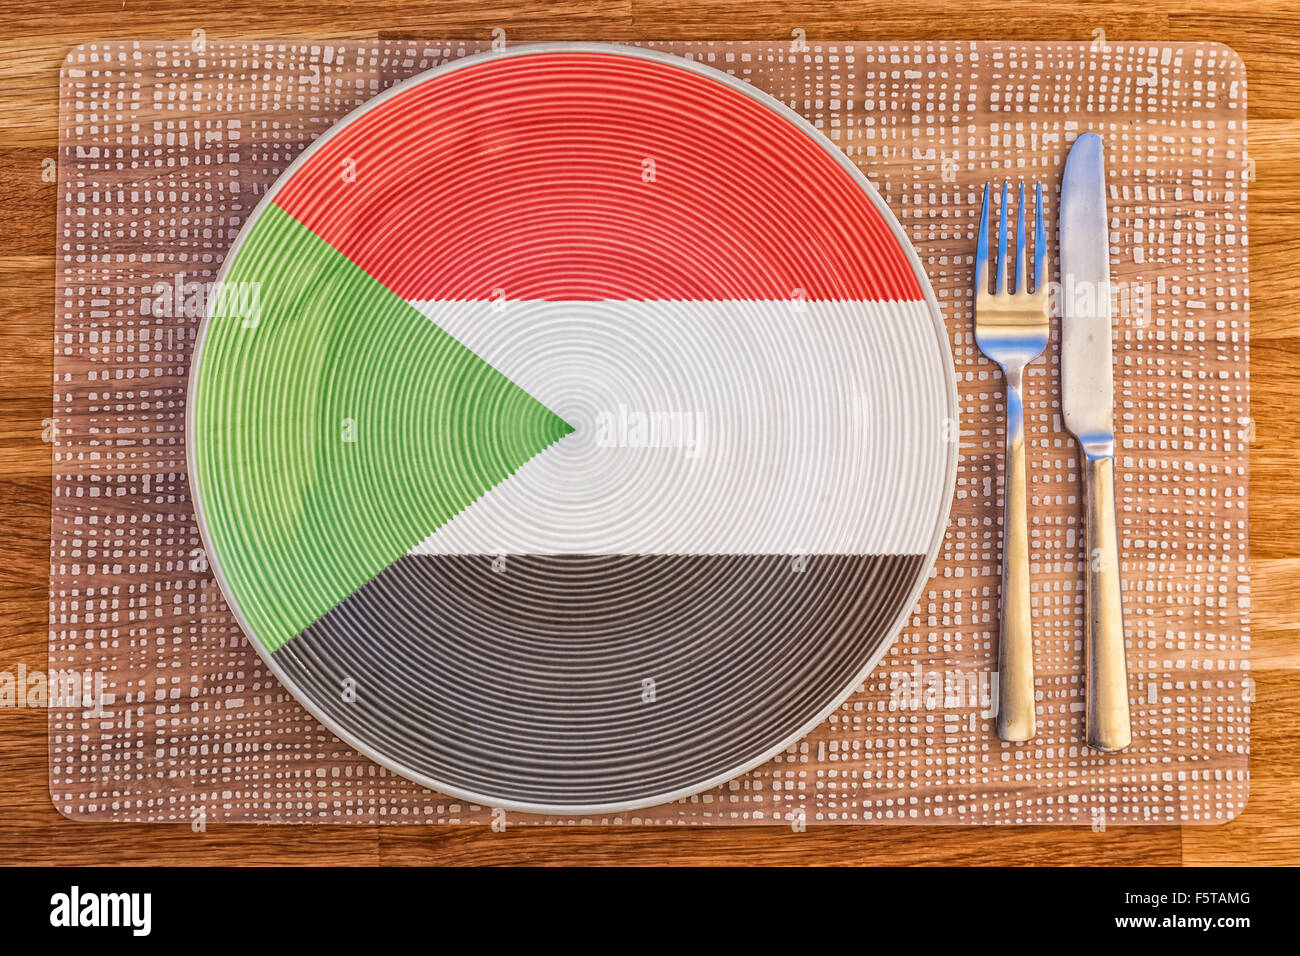 Dinner plate with the flag of Sudan on it for your international food and drink concepts. Stock Photo